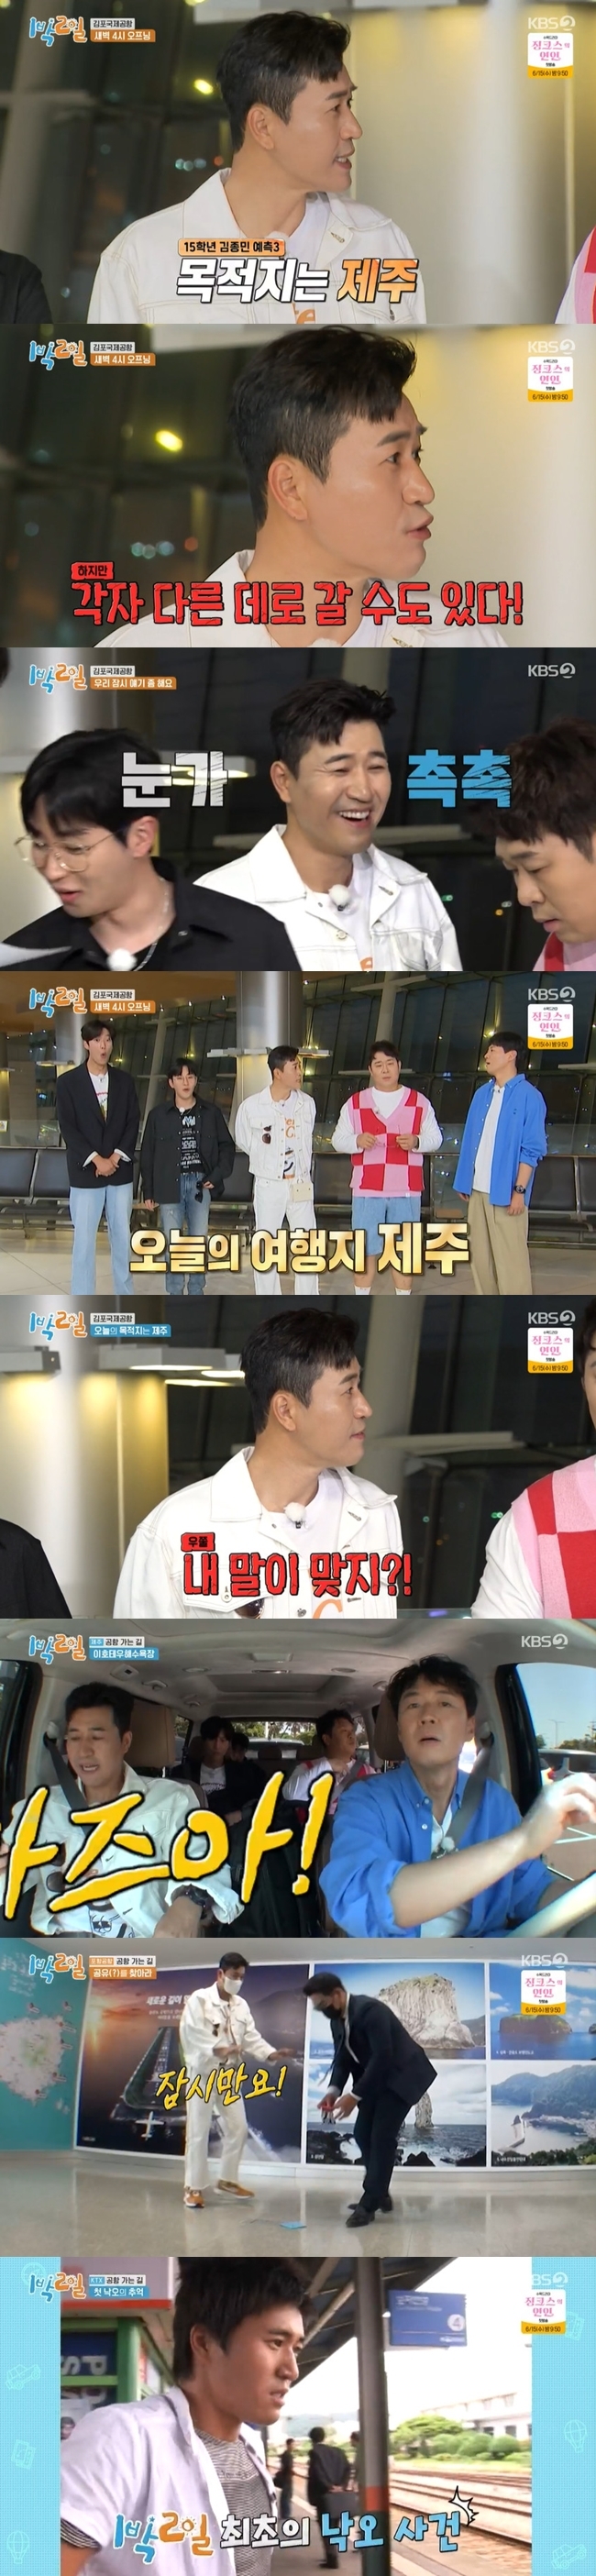 Kim Jong-min has proved his long-standing 2 Days & 1 Night.On KBS 2TV Season 4 for 1 Night 2 Days (hereinafter referred to as 1 night and 2 days), which was broadcast on June 5, a special feature was held on the way to Airport.The members gathered at Airport for a long time. The members who took the opening at Airport from 4 am.Yeon Jung-hoon, who arrived first, said, I am excited when I come to Airport. He laughed, We are one night and two days, right? It is like one night and three days.In addition, Kim Jong-min said, I think I will be up to it in connection with Lee Jung-gyu PD, who became the main PD of 2 Days & 1 Night.Kim Jong-min, who has 15 years of experience in 2 Days & 1 Night prior to the start of the full-scale trip, said, Planes ride unconditionally, but you will not be able to ride together.The destination is Jeju Island, but you can go to different places, Premonition said. Kim Jong-mins first prediction was right.Because the destination was Jeju Island: 2 Days & 1 Night chose to go to Jeju Island after a long time since the social distance reduction.But there was a twist: Mun Se-yun had to go to Girl, not Jeju Island alone, only then that the members realized that the Planes votes were different.Discovering that his The Departure magazine was Daegu, DinDin rushed to crazy - as did the other members.Yeon Jung-hoon The Departure was Cheongju Broadcasting, and Kim Jong-min had to be The Departure in Pohang.Na In-uman headed from Gimpo to Jeju Island; Kim Jong-min Premonition hit again.Why are you doing that since last week, DinDin expressed his anger.Lee Jung-gyu PD introduced the first concept as Airport Road while the atmosphere was unusual from the opening.The different Departures were fairly determined by the VJs in charge of the ladder, and the VJs were to be on the ladder.Each member had to resolve the given mission at Airport, reasoning for the Jeju Island opening place and acquiring place hints and items through the mission.By 1:30 pm, all five members gathered to benefit from the failure and to be punished if they failed.DinDin and Kim Jong-min, who headed to Seoul Station to ride KTX, expressed fear at 2 Days & 1 Night, which changed, saying, I will beat it from the beginning.Since then, DinDin and Kim Jong-min have taken KTX together; Kim Jong-min mentioned the first fallout of the entertainment at the time of season 1 when Lee Jung-gyu PD asked about memories related to the train.Kim Jong-min recalled memories of the first fallout, saying: Im not forgotten; it was the first time I was going to take someone off.Kim Jong-min, who was taking a train at the time and eating noodles for a while, was embarrassed when the train was depared.Kim Jong-min recalled, I didnt believe it at first; I thought the train would come back, I couldnt imagine it, so DinDin said, My brother created a new paradigm.I am a great person, said Kim Jong-min, who laughed at me, saying, I did not make it. Yeon Jung-hoon took a leisurely express bus from Gimpo to Incheon and Cheongju Broadcasting alone.Yeon Jung-hoon arrived at Cheongju Broadcasting Airport and went to find Piano to complete the mission.Yeon Jung-hoon, who secured the score in Piano, called Kim Jong-min and asked him the title of the questionable song on the score.Kim Jong-min did not solve the question, but Yeon Jung-hoon completed the mission in 10 seconds thanks to his wife Han Ga-in.Yeon Jung-hoon said, There is only a wife who can be trusted.After Mun Se-yun arrived at Jeju Island Airport alone in the Girl, the members of 2 Days & 1 Night reunited at Jeju Island Airport at the end of twists and turns.The members combined the mission to find out that the destination was Ihoteu Beach, and they had the luck of arriving at Ihoteu Beach with only 7 minutes left before the mission was completed.This gave the members the benefits they needed for their trip to Jeju Island, a bounty for pocket money.